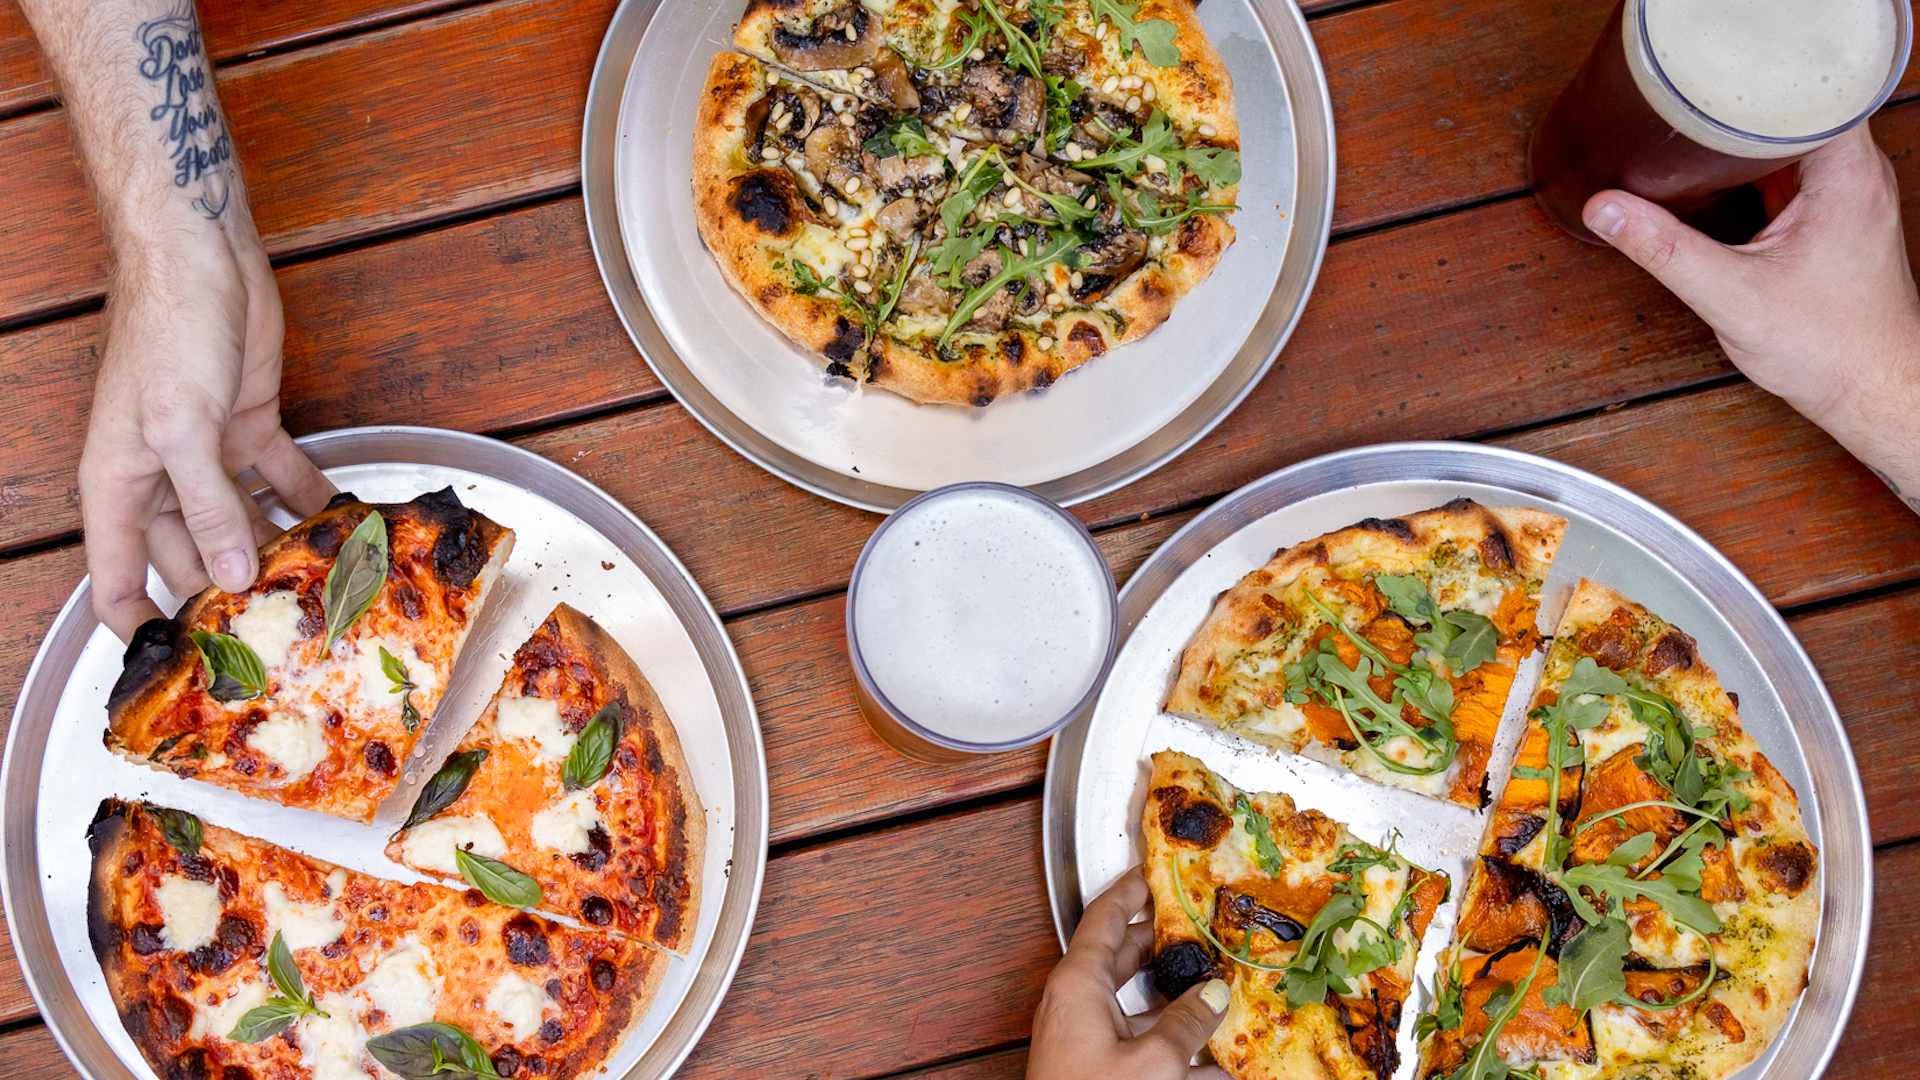 Kewpie Is the New Bar and Pizza Joint Launching Inside Bimbo's Former Site Next Month